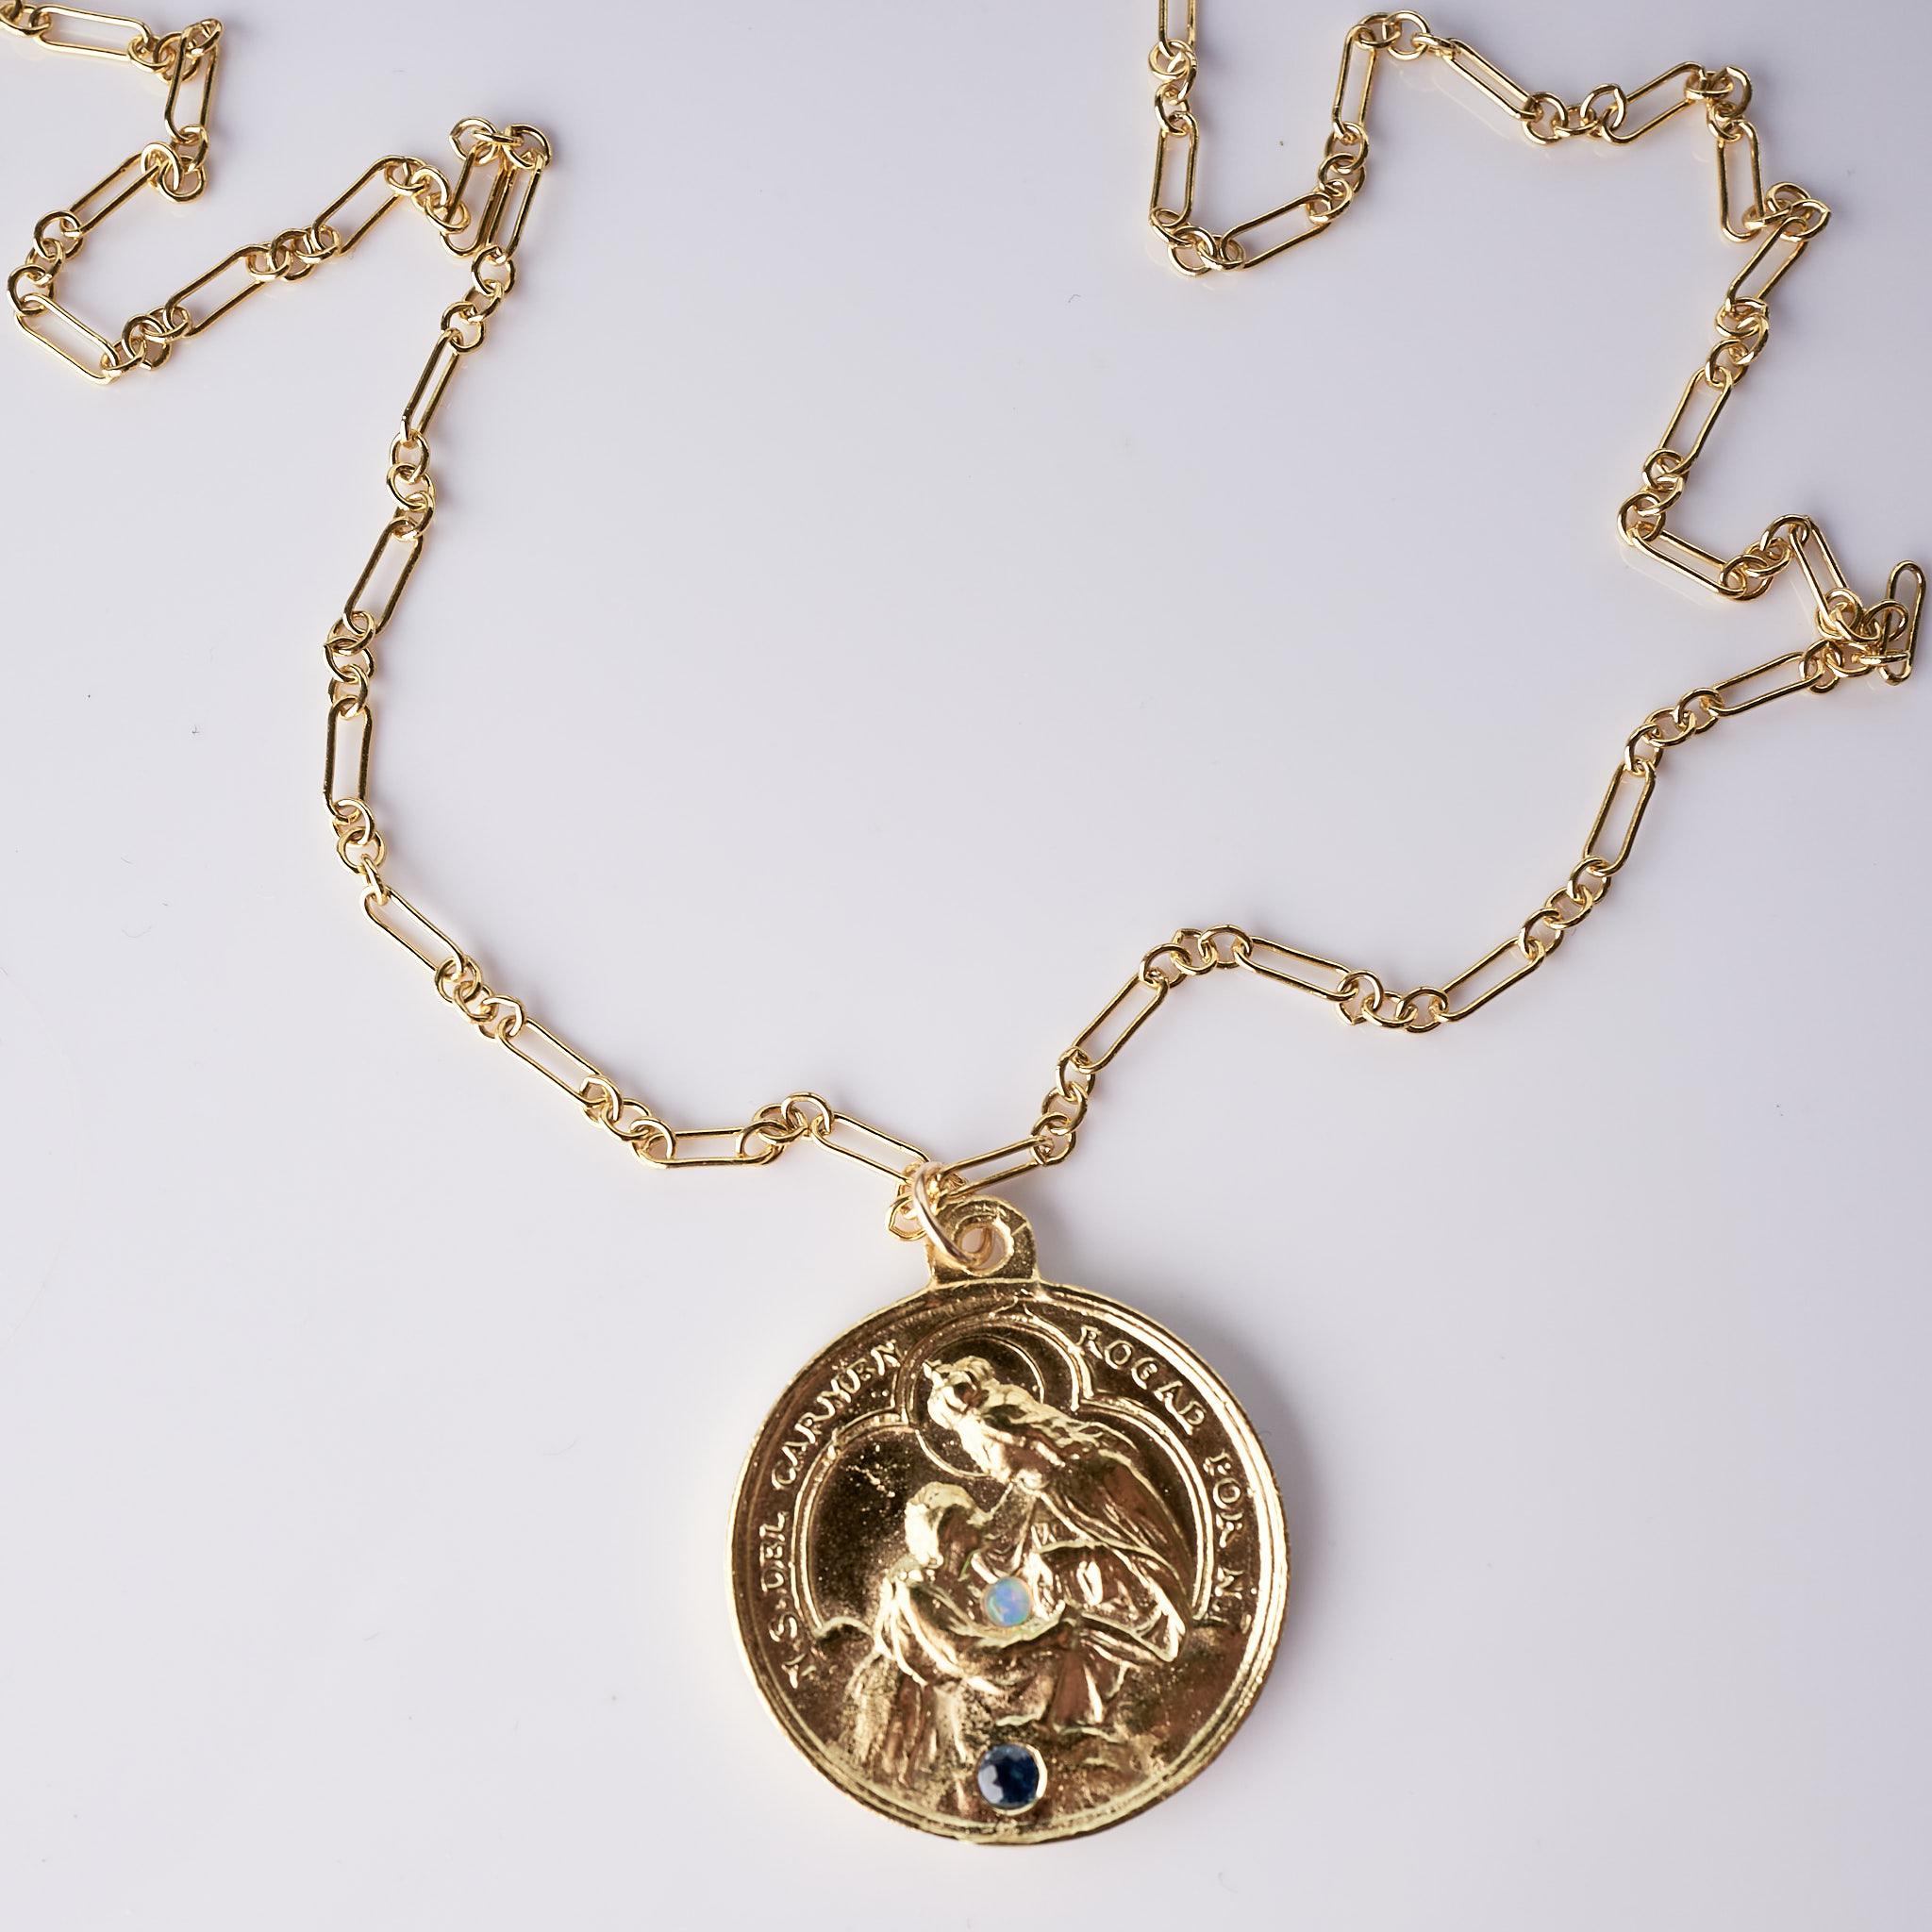 Contemporary Sapphire Opal Medal Chain Necklace Religious Gold Tone J Dauphin For Sale